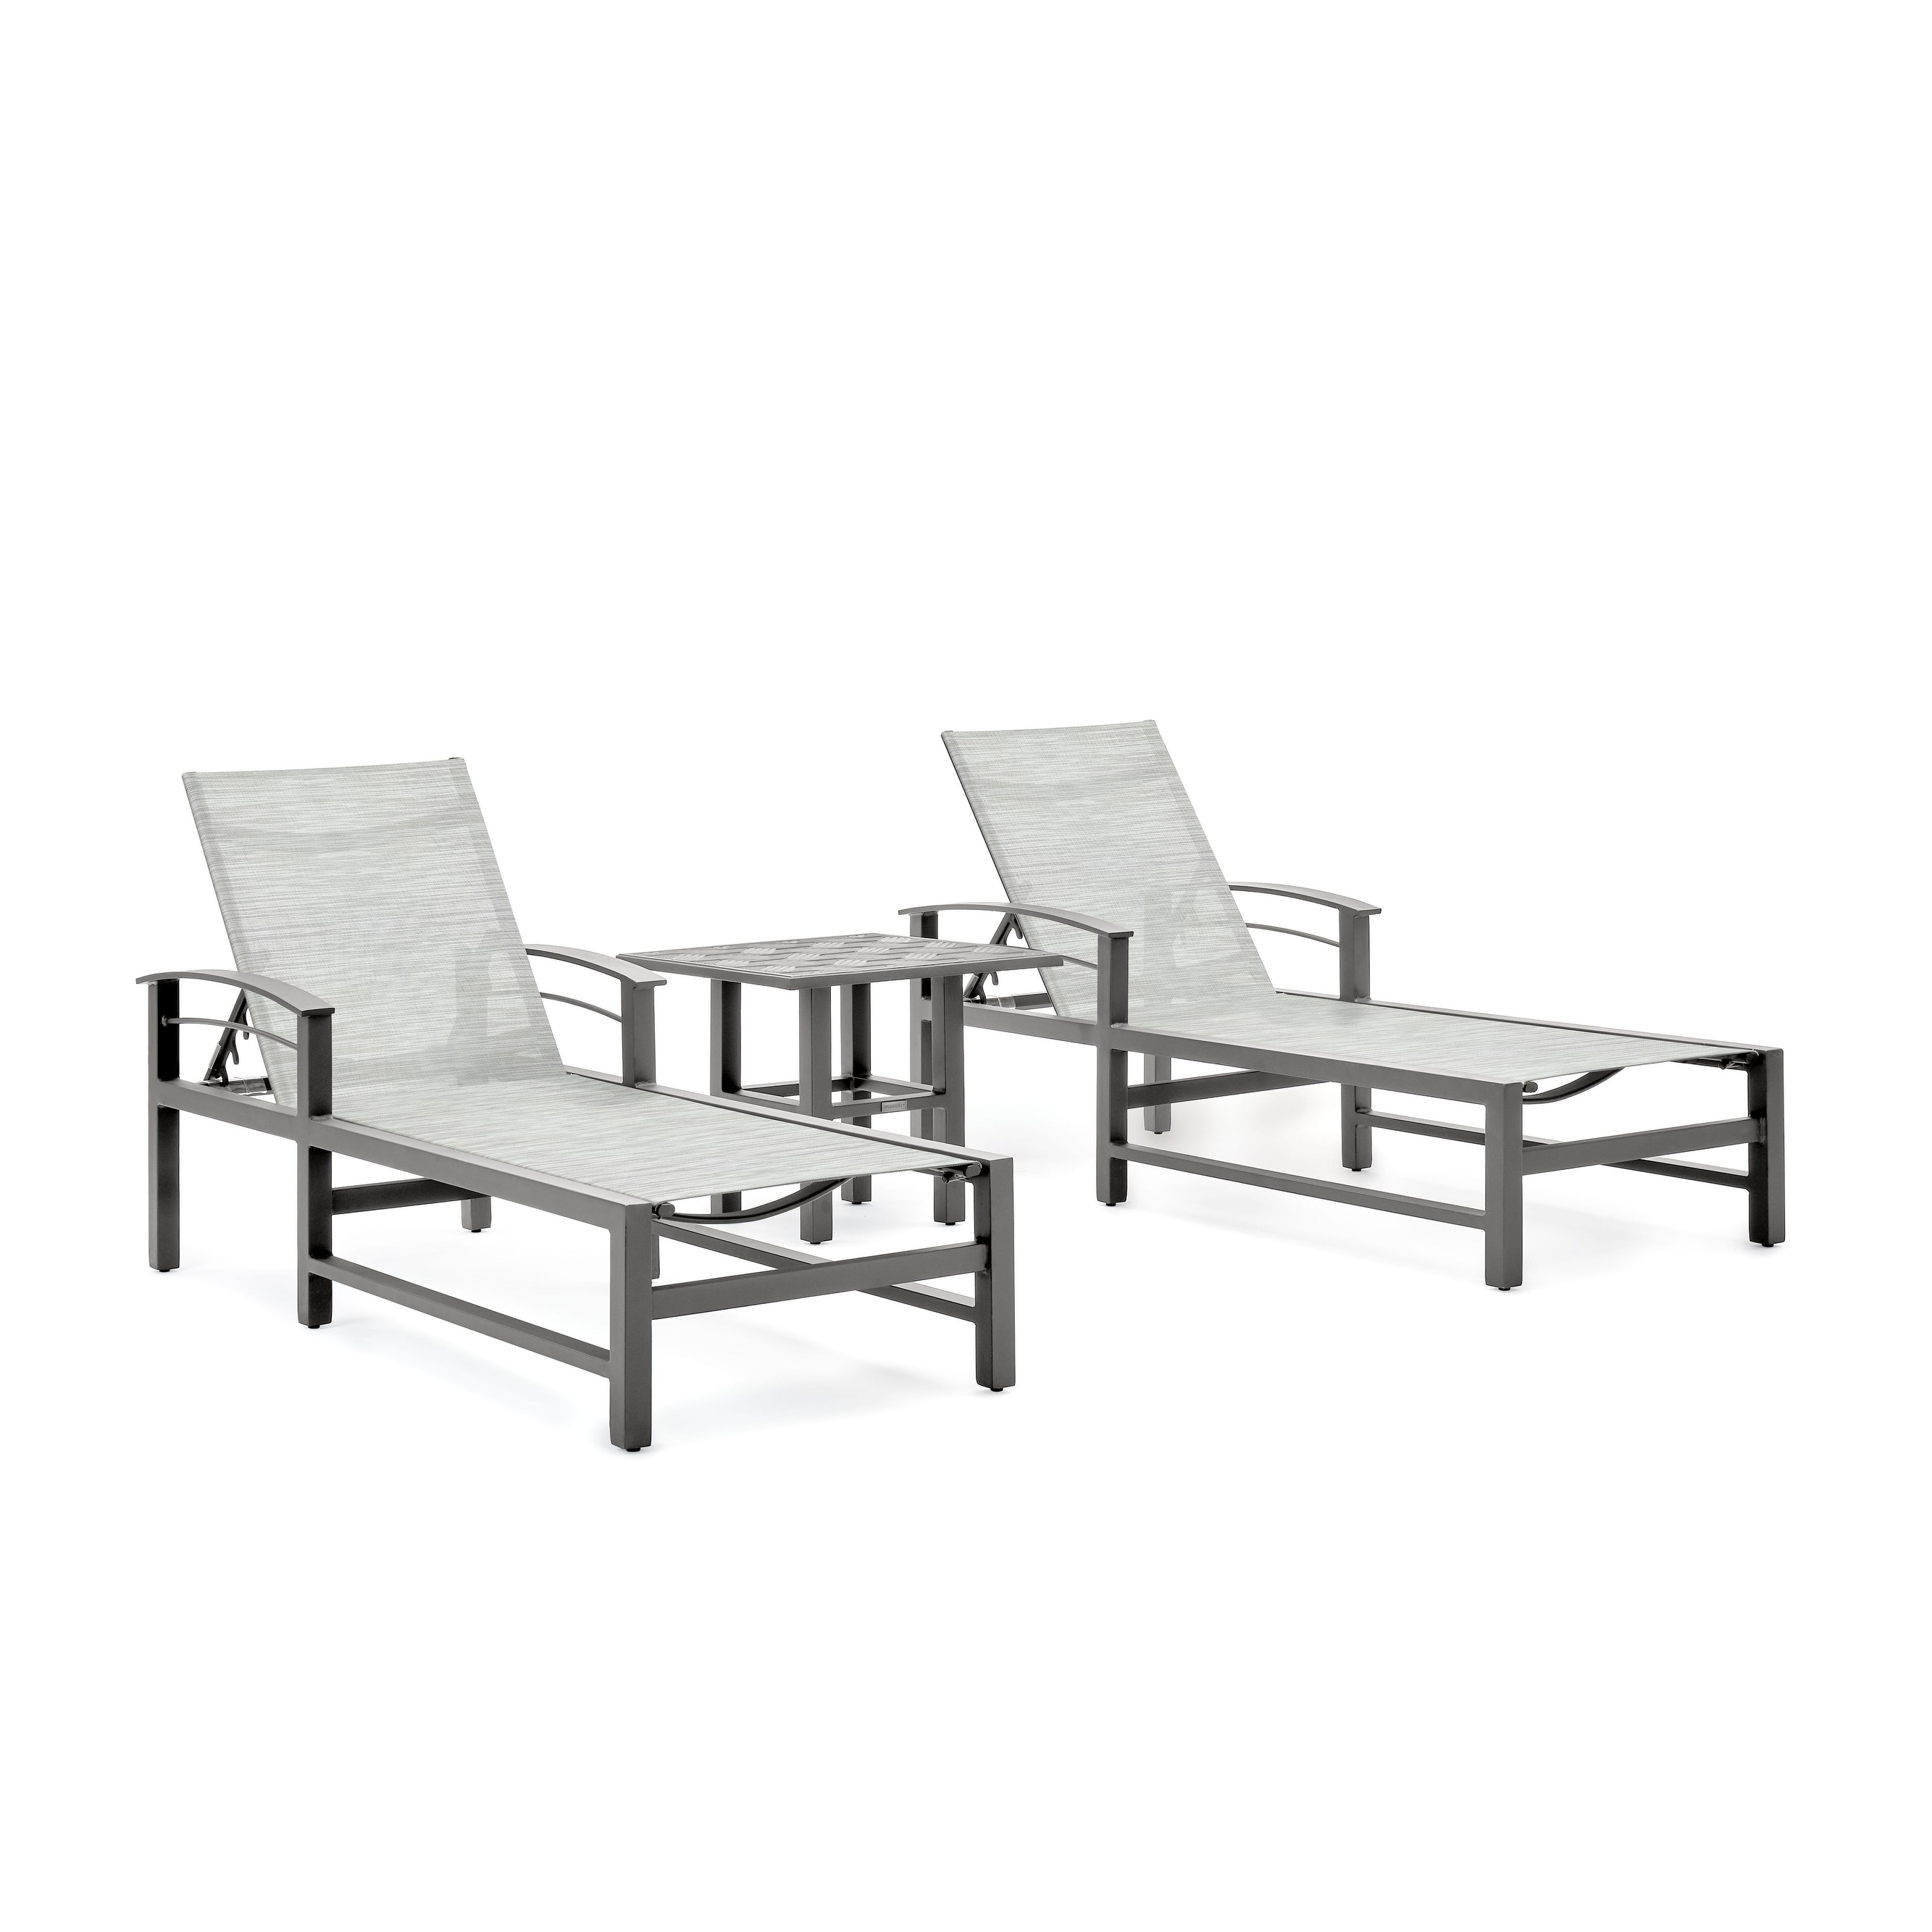 Stanford Sling 3pc Chat Set (2 Chaises  Side Table)